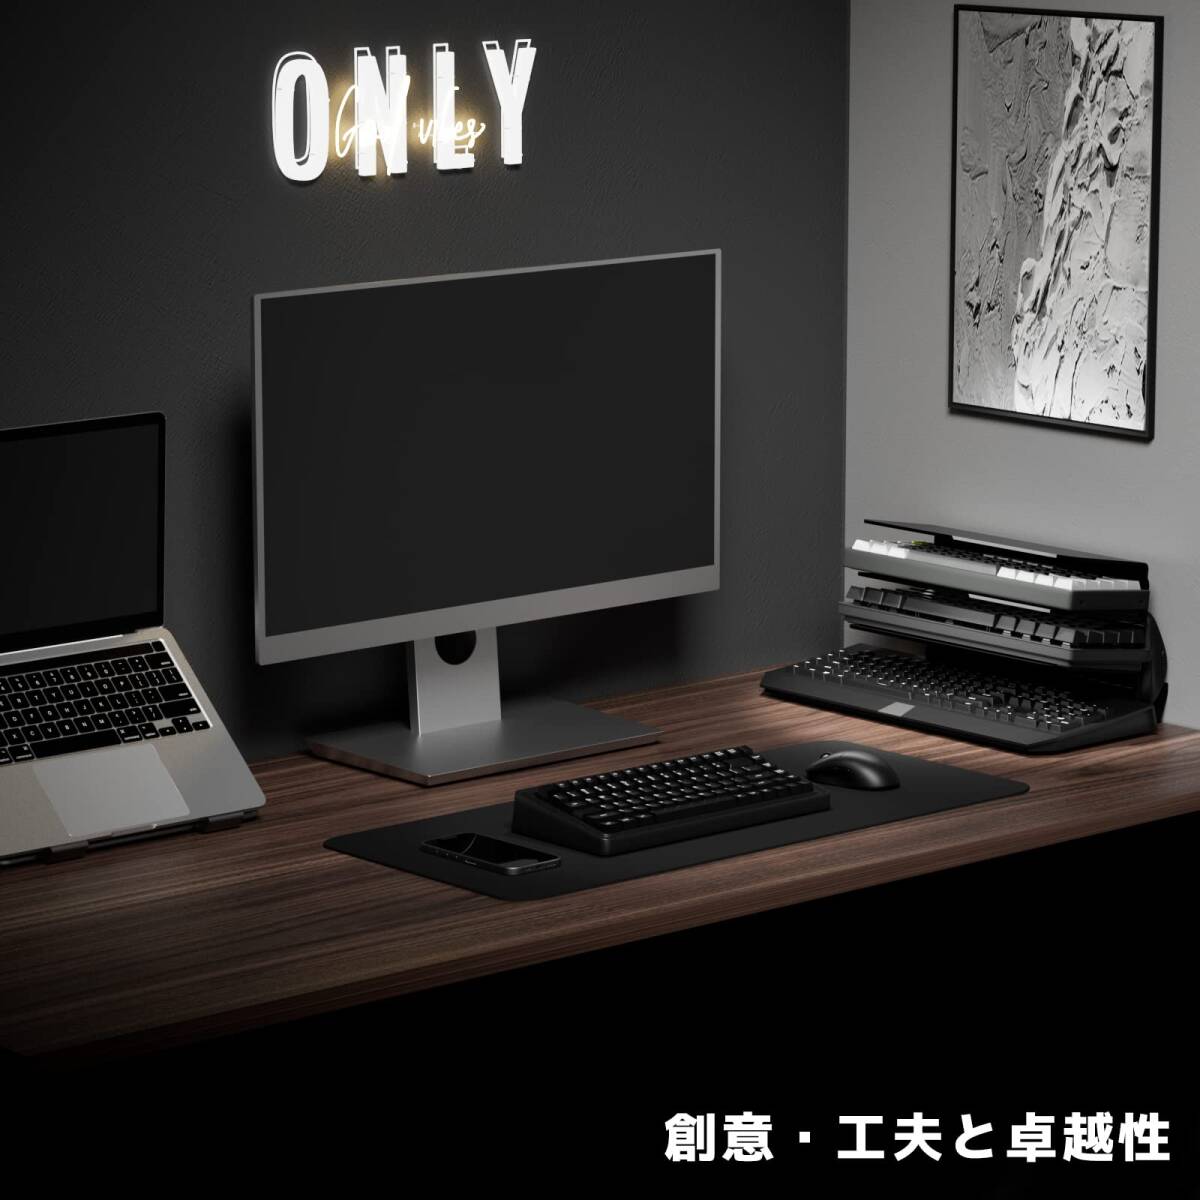  recommendation stylish & practical!3 -step keyboard holder display stand 